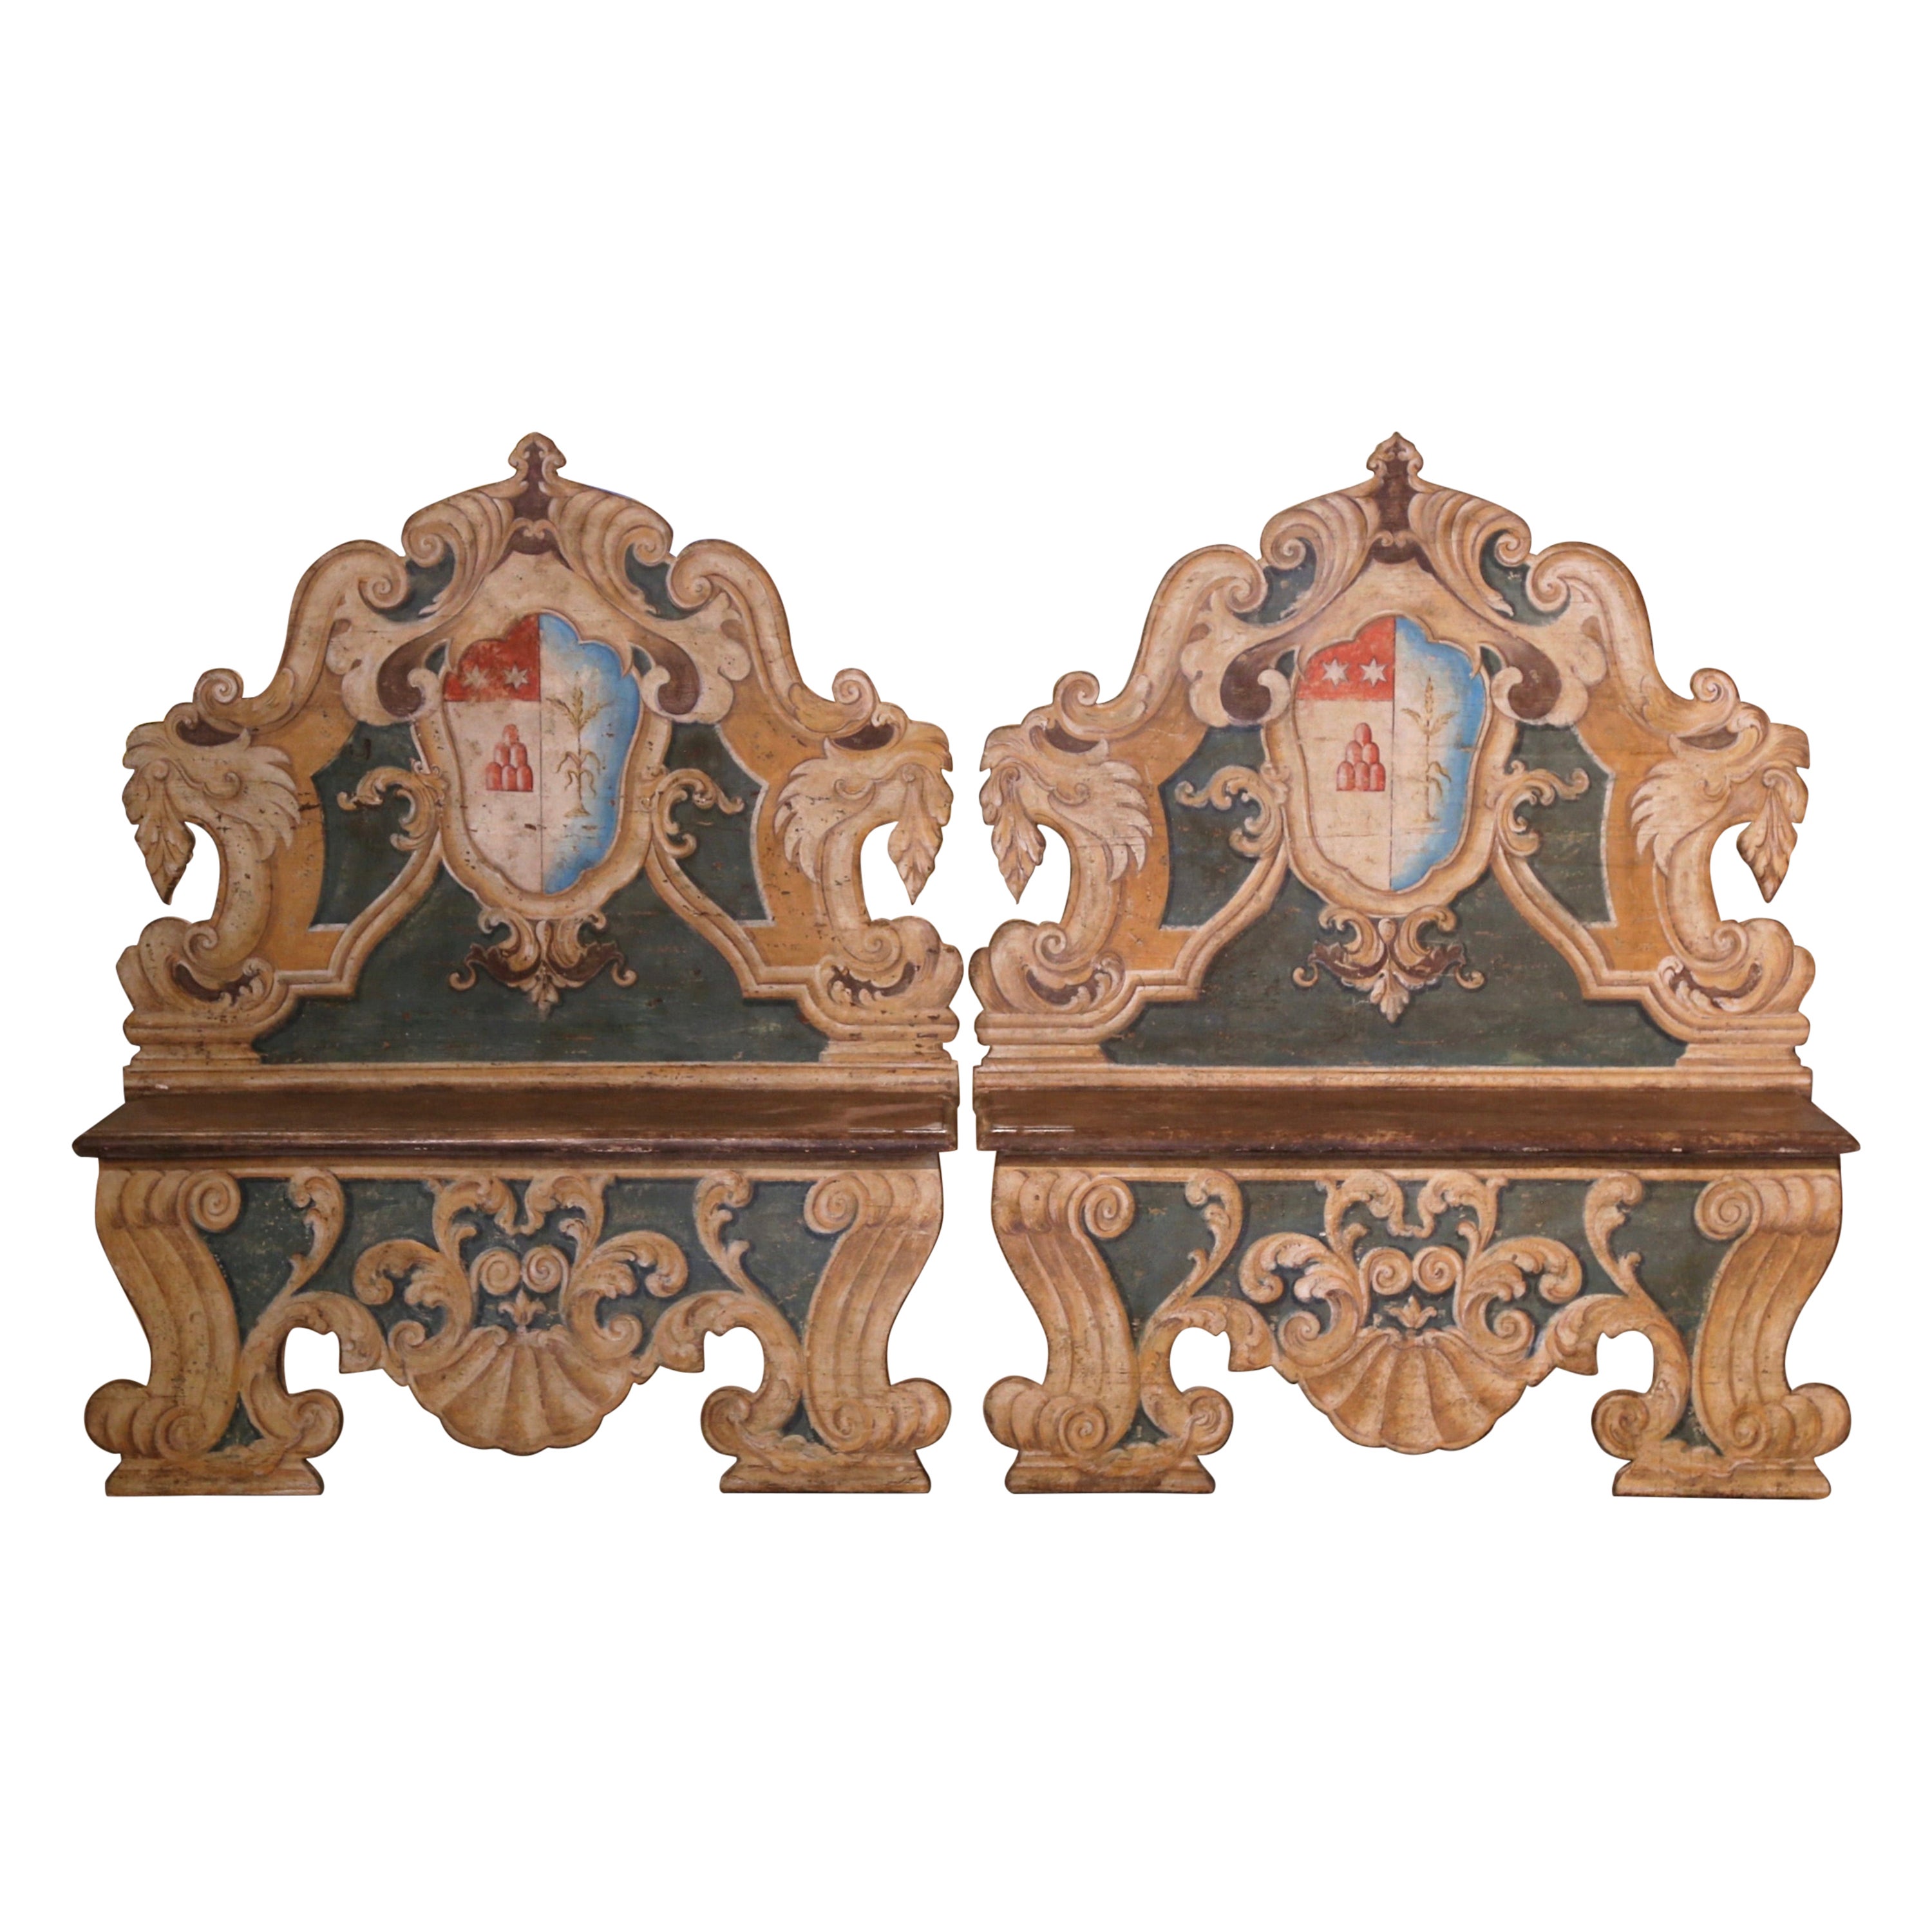 Pair of 19th Century Italian Carved and Hand-Painted Cassapanca Benches